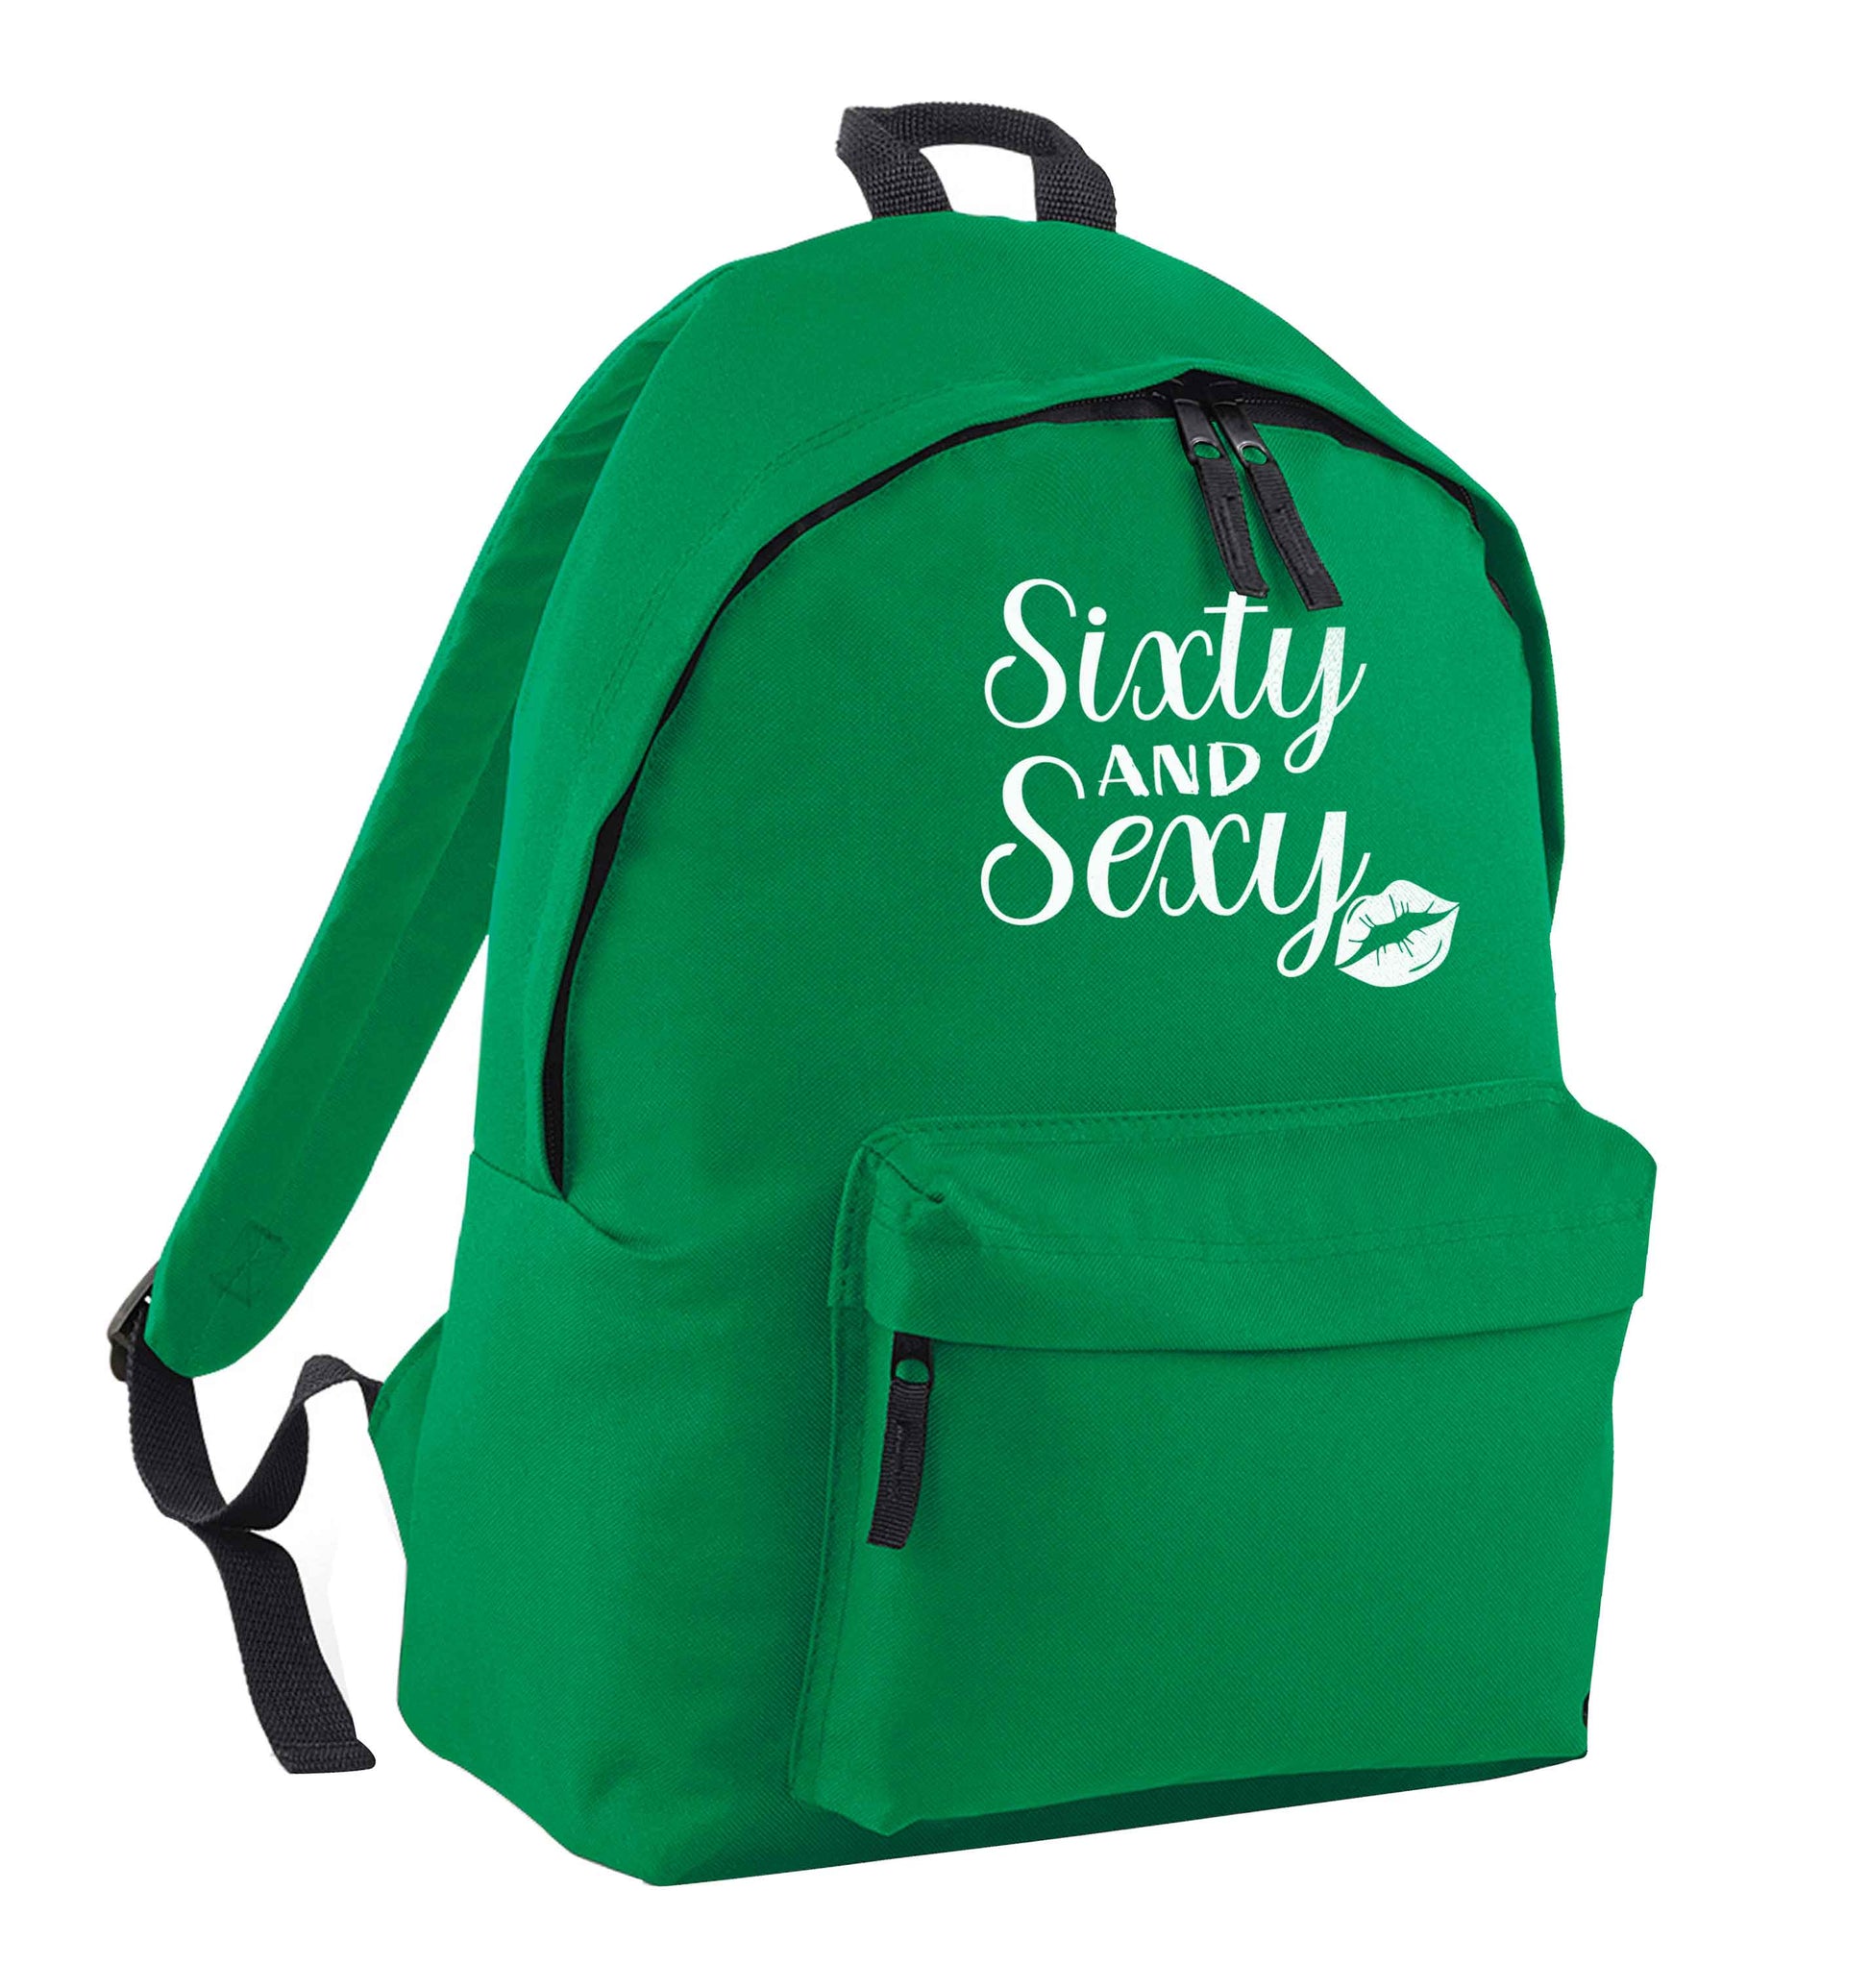 Sixty and sexy green adults backpack